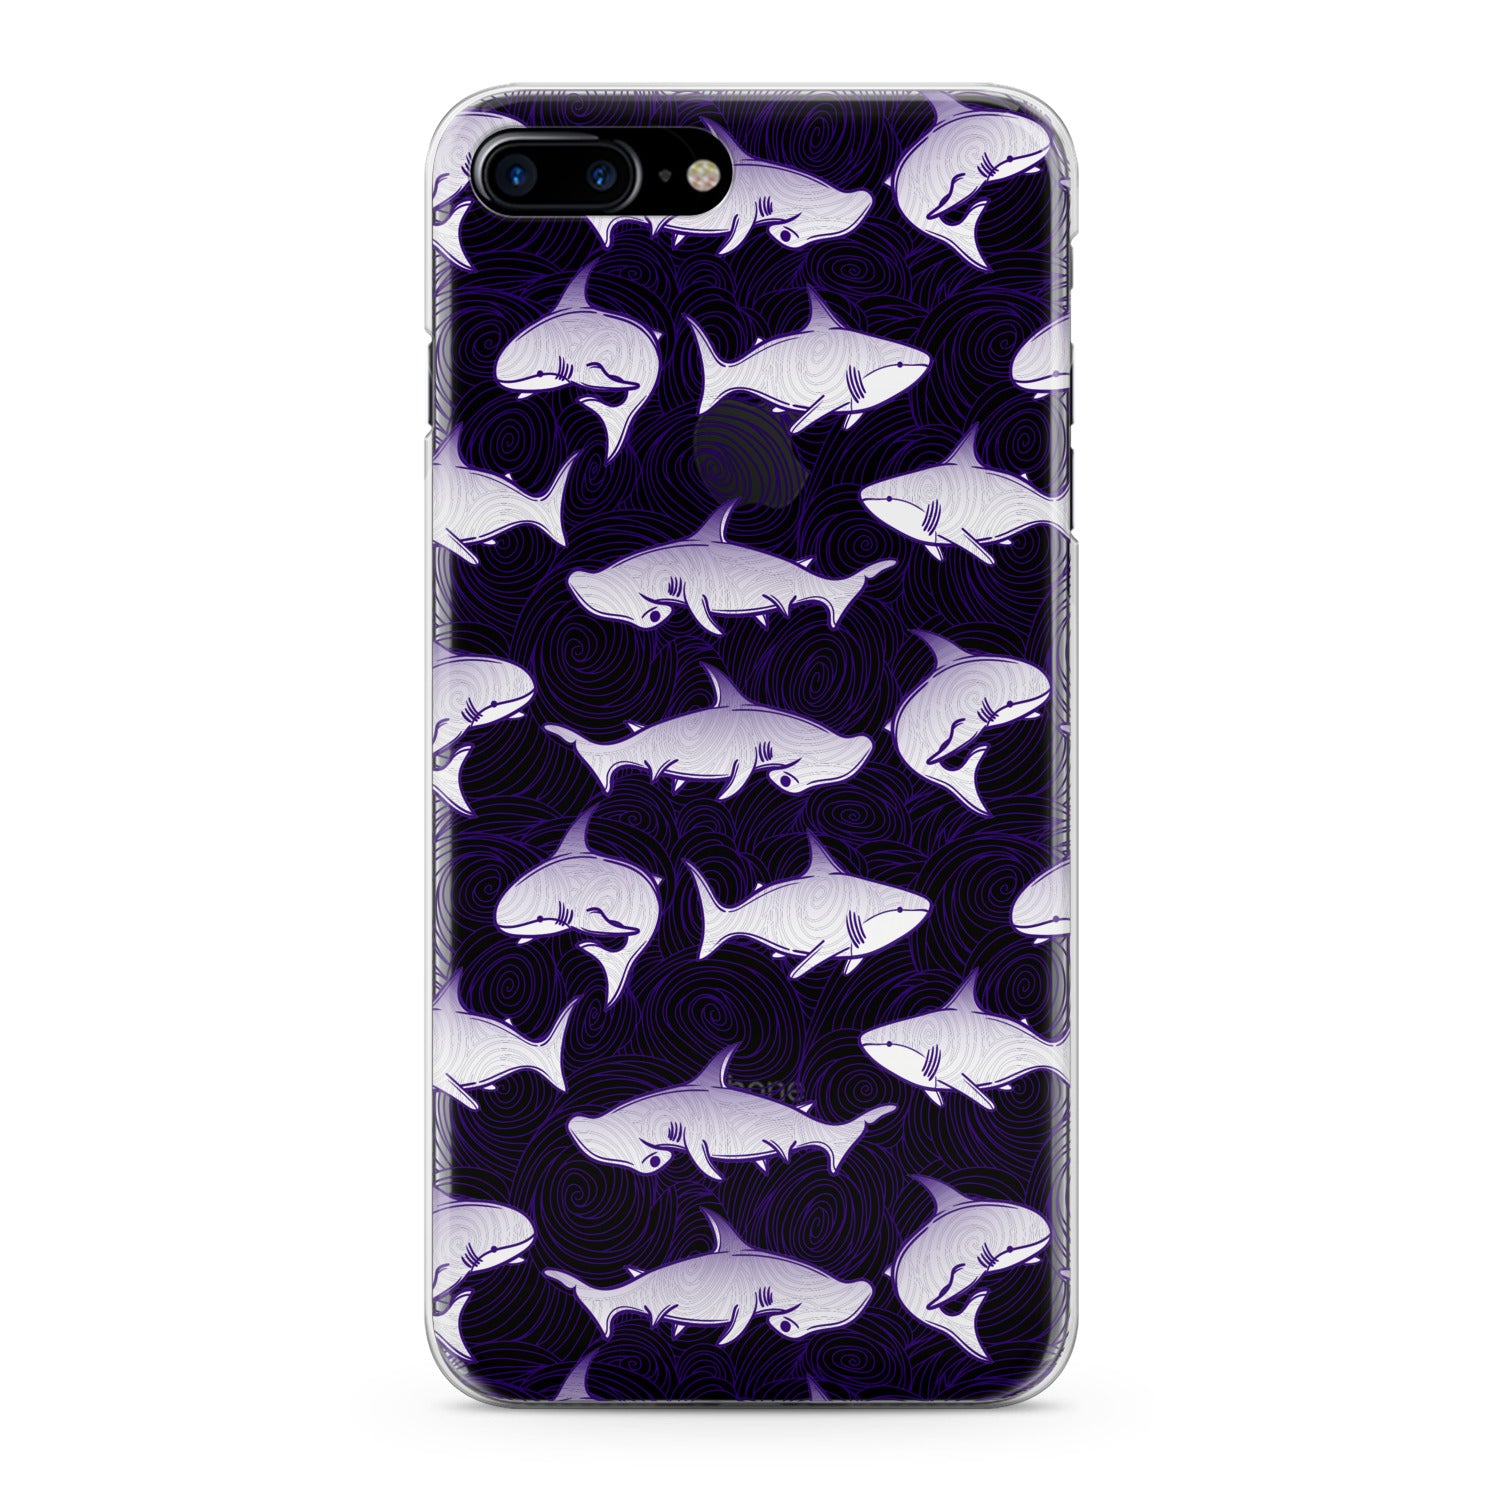 Lex Altern Hammer Fishes Phone Case for your iPhone & Android phone.